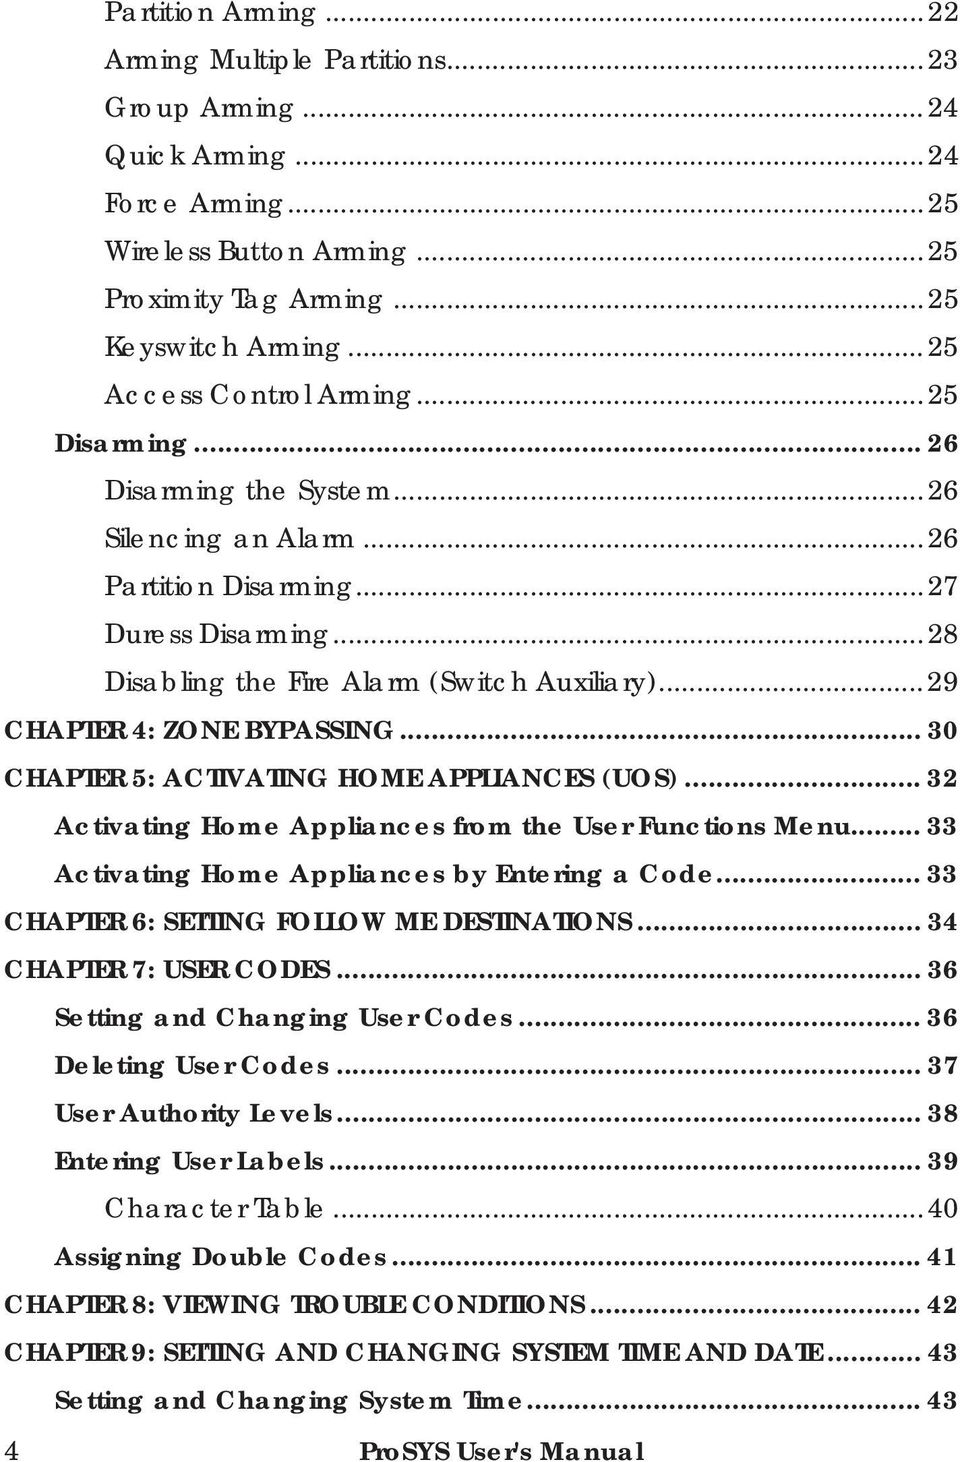 ..29 CHAPTER 4: ZONE BYPASSING... 30 CHAPTER 5: ACTIVATING HOME APPLIANCES (UOS)... 32 Activating Home Appliances from the User Functions Menu... 33 Activating Home Appliances by Entering a Code.